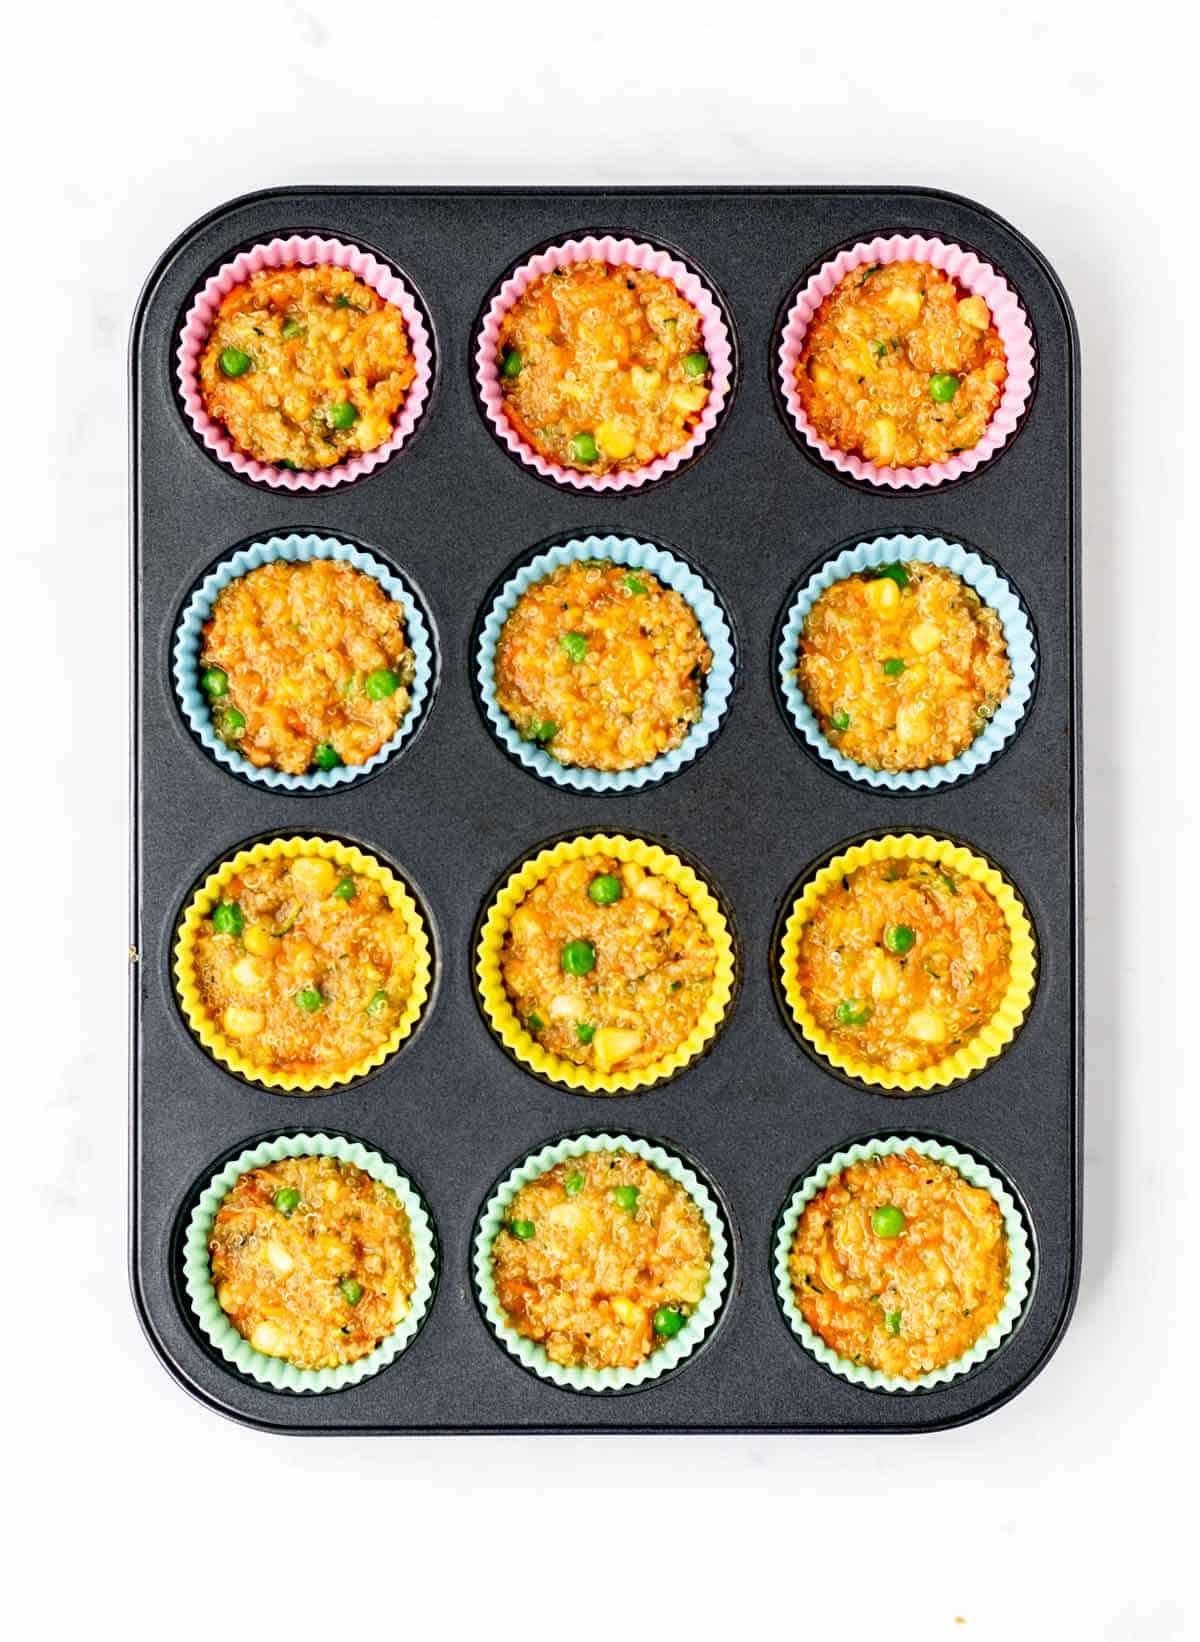 Uncooked quinoa veggie bites in silicone liners in a muffin tin.